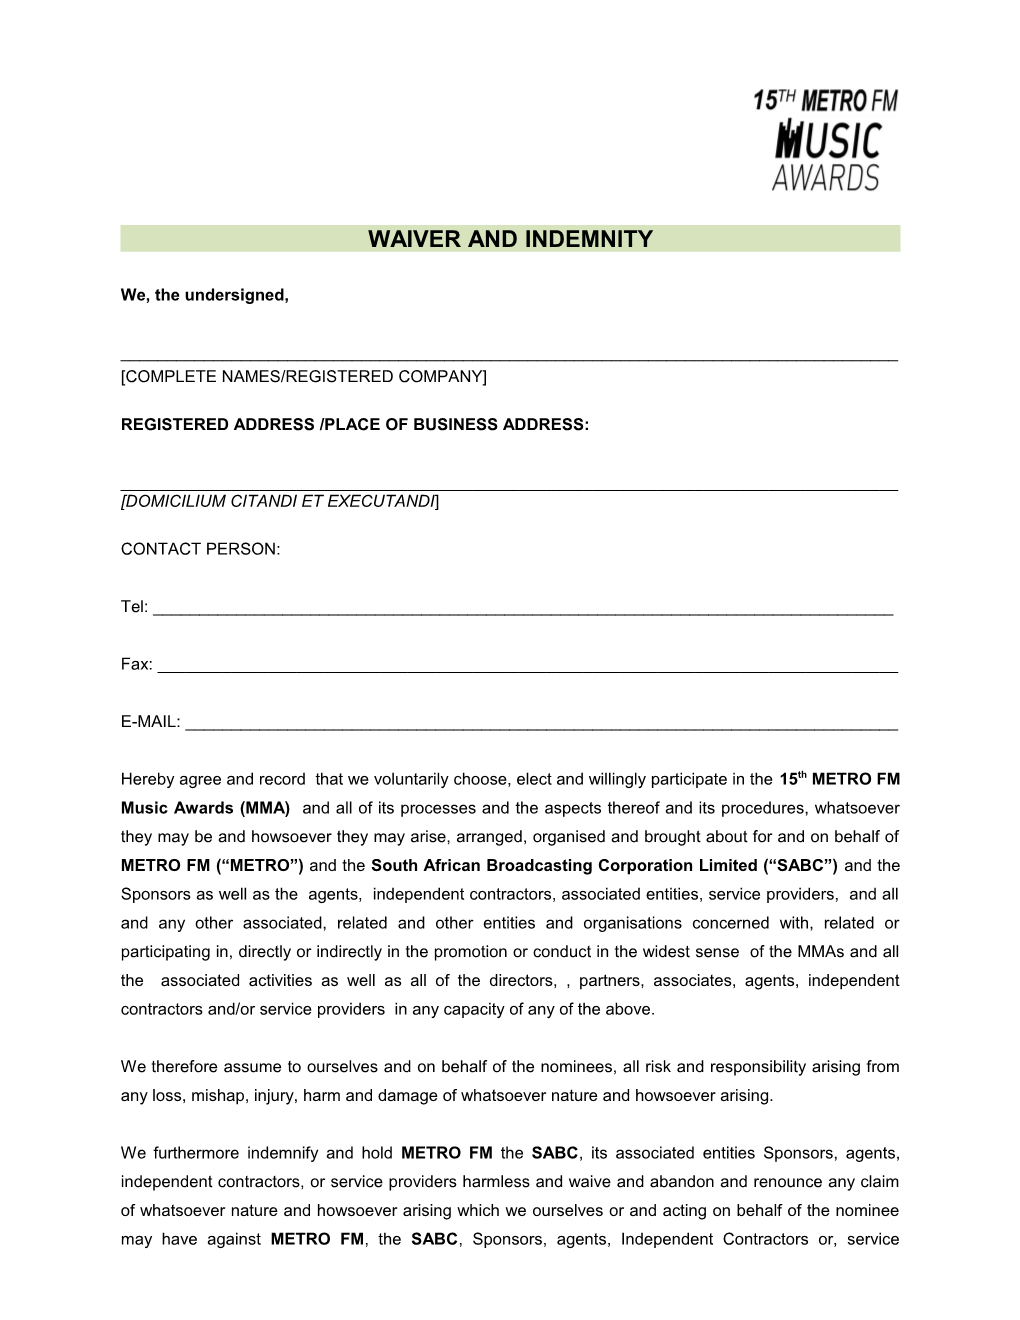 Waiver and Indemnity